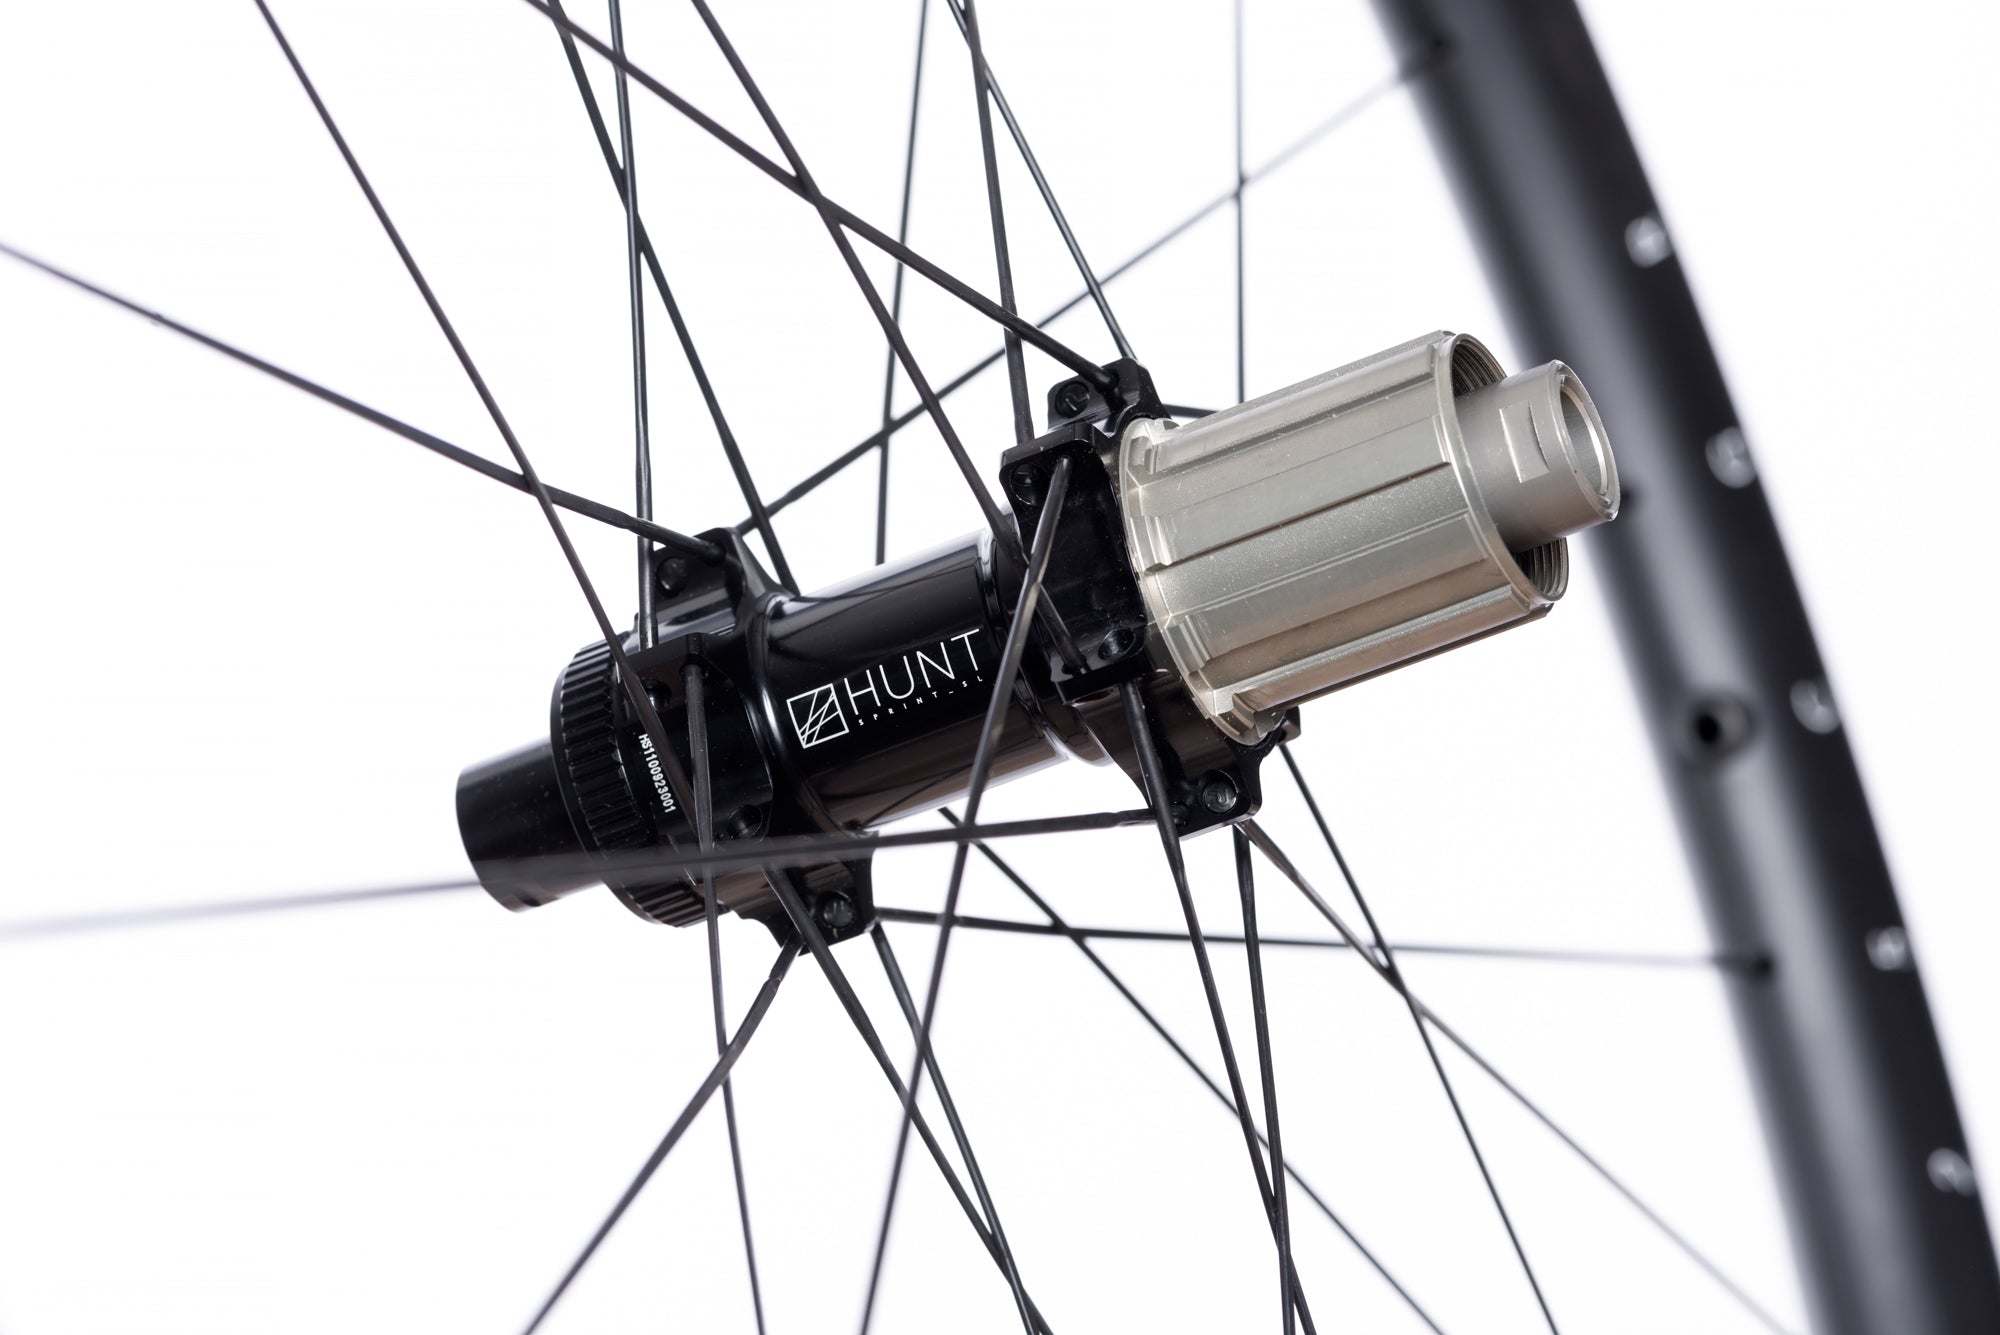 <h1>Freehub Body</h1><i>Featuring 3x treble-tooth pawls and a 48 tooth ratchet ring results in an impressively low 7.5-degree engagement angle, and excellent resistance to wear under heavy loads. The Sprint freehub has strong individual pawl springs which drive a consistent engagement. There is also a Steel Spline Insert re-enforcement to provide excellent durability against cassette sprocket damage.</i>